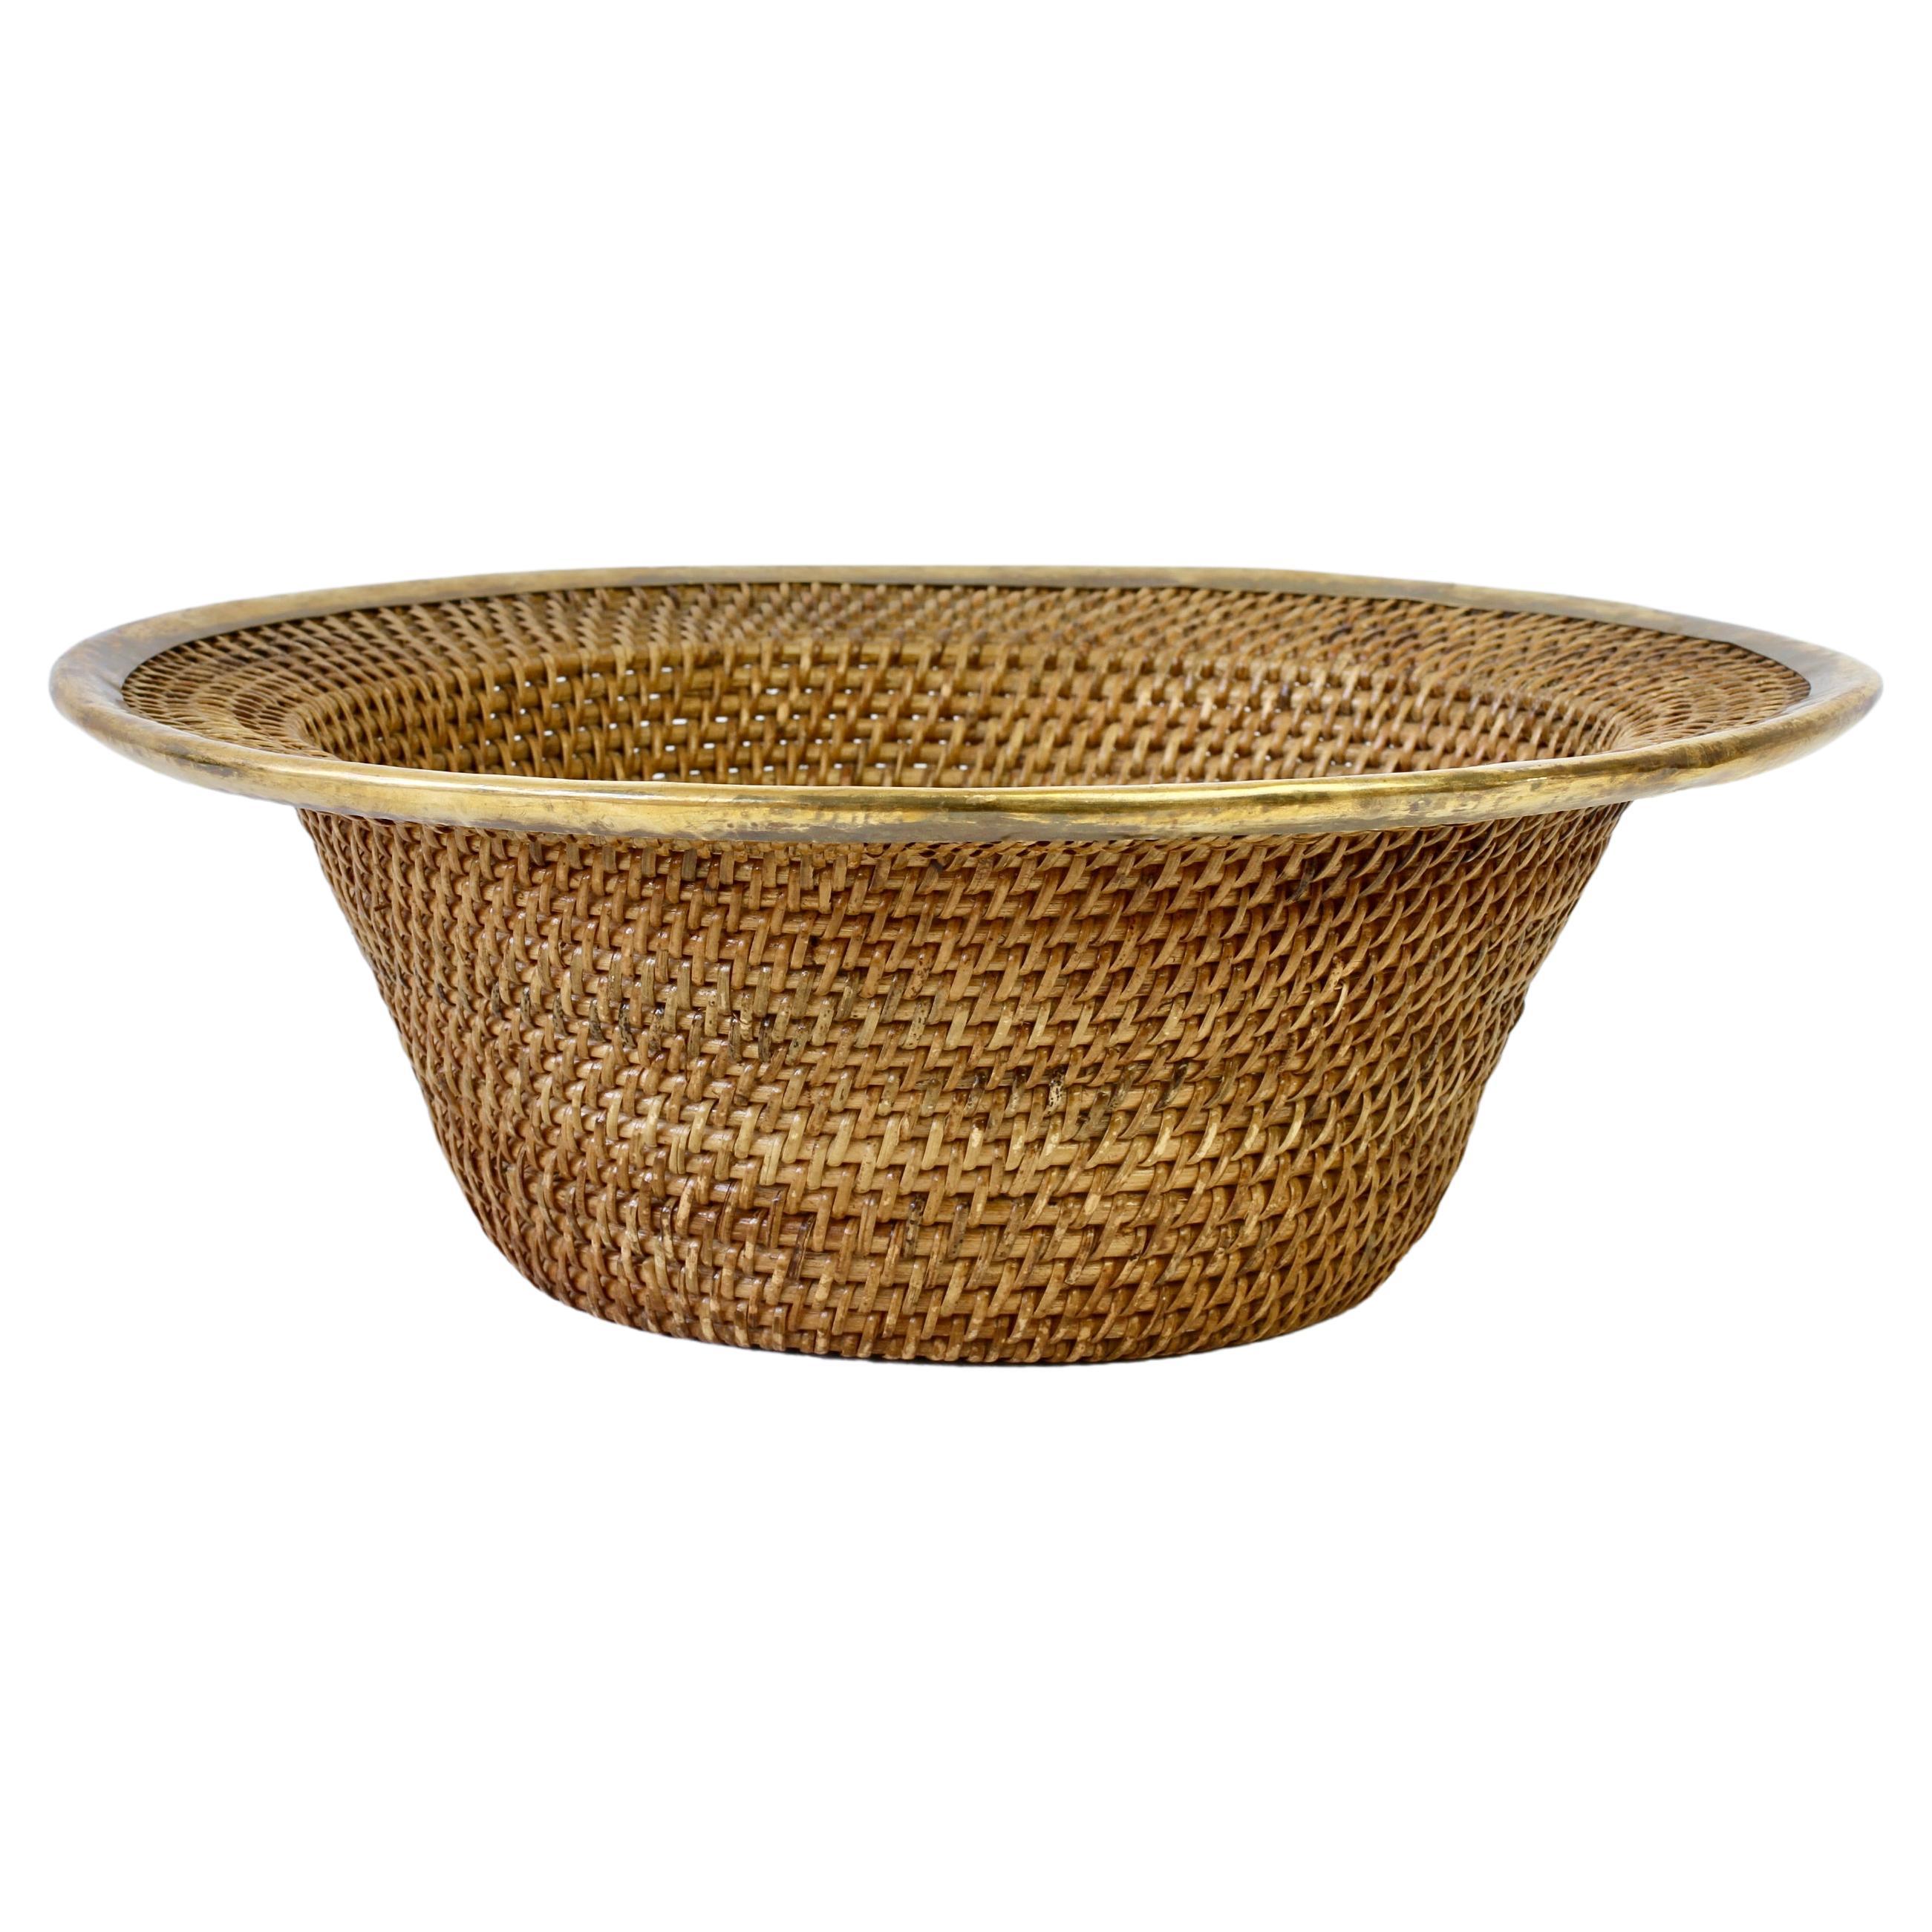 1970s Large Vintage Italian Wicker, Rattan and Brass Bowl or Dish